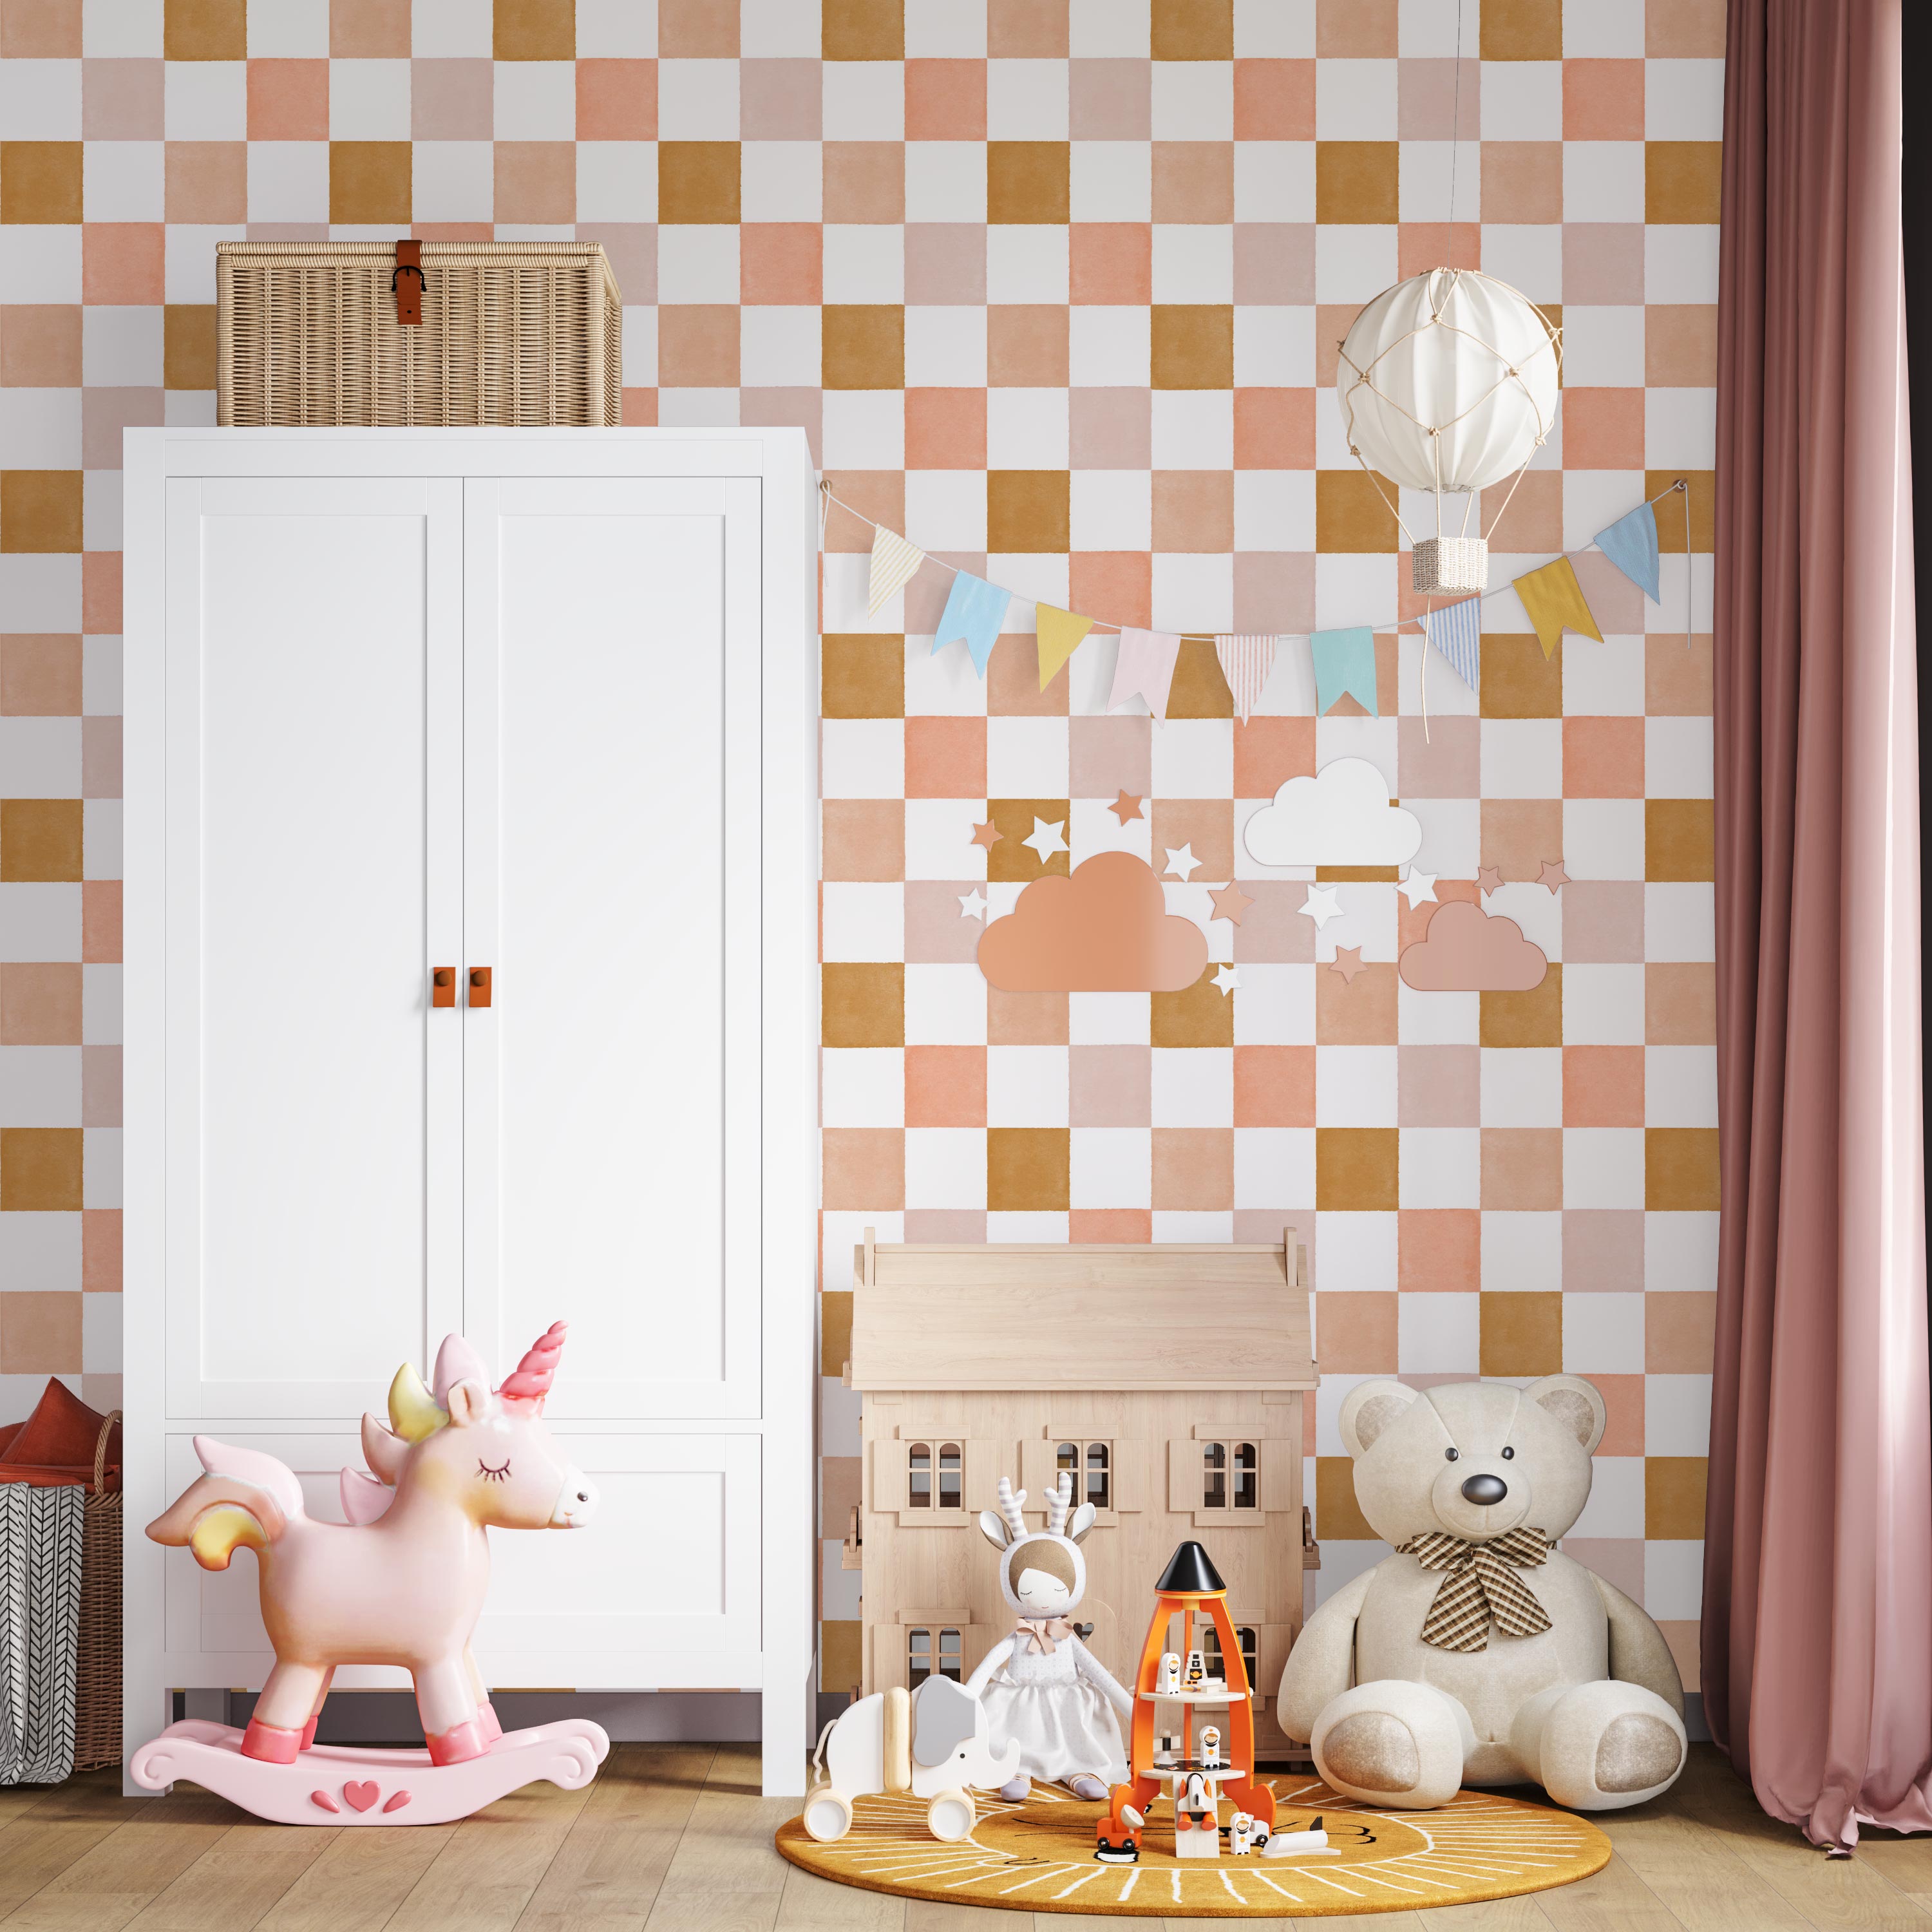 files/A-delightful-nursery-room-transforms-into-a-playful-haven-with-pink-checkered-peel-and-stick-wallpaper_-adding-a-touch-of-sweetness-and-visual-interest-to-the-space.jpg